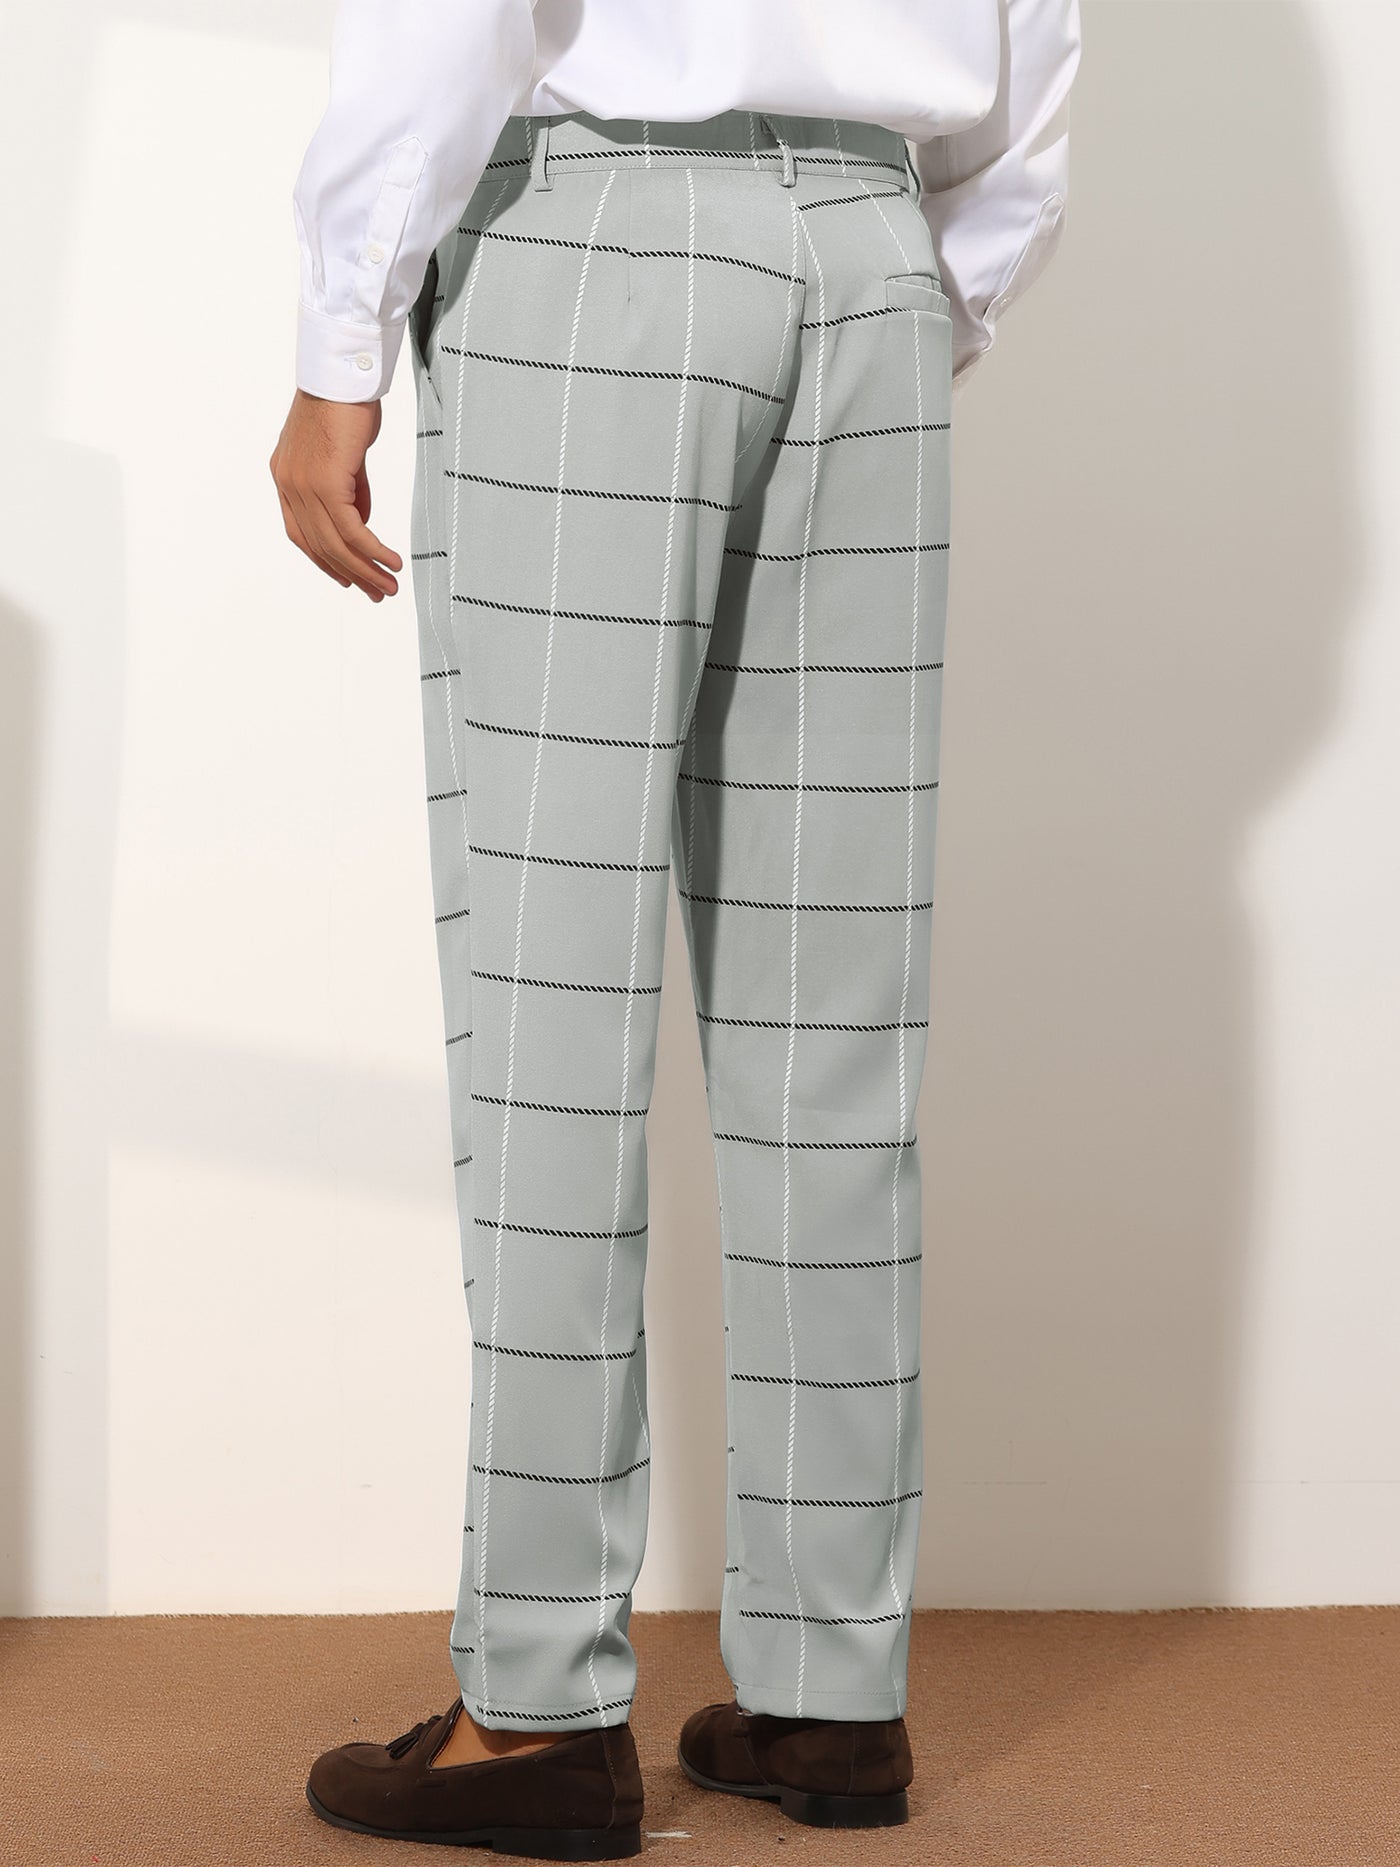 Bublédon Plaid Dress Pants for Men's Regular Fit Tapered Checked Business Trousers